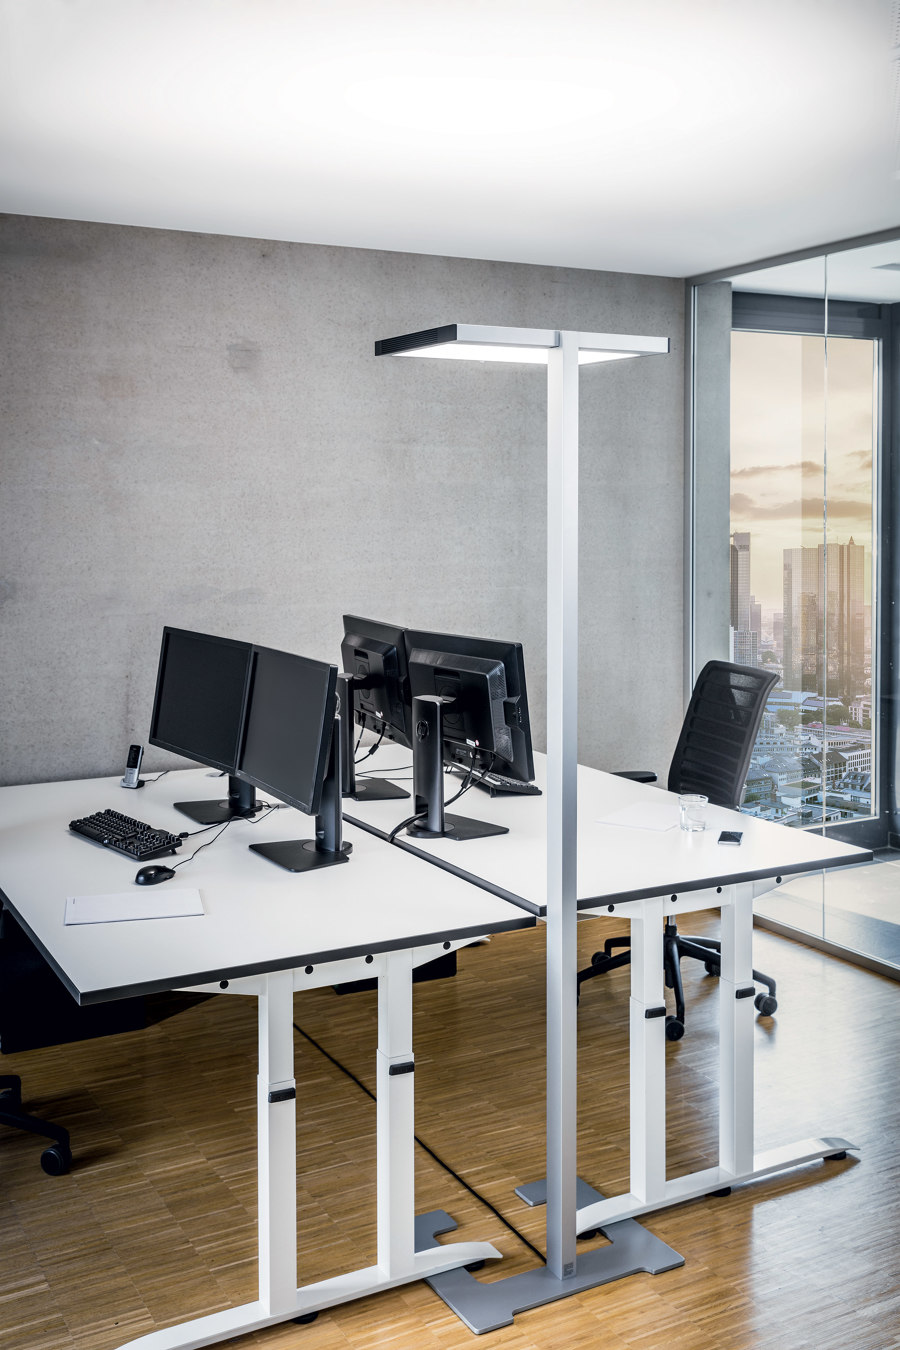 LUCTRA VITAWORK: Energy saving means environmental protection | Architettura